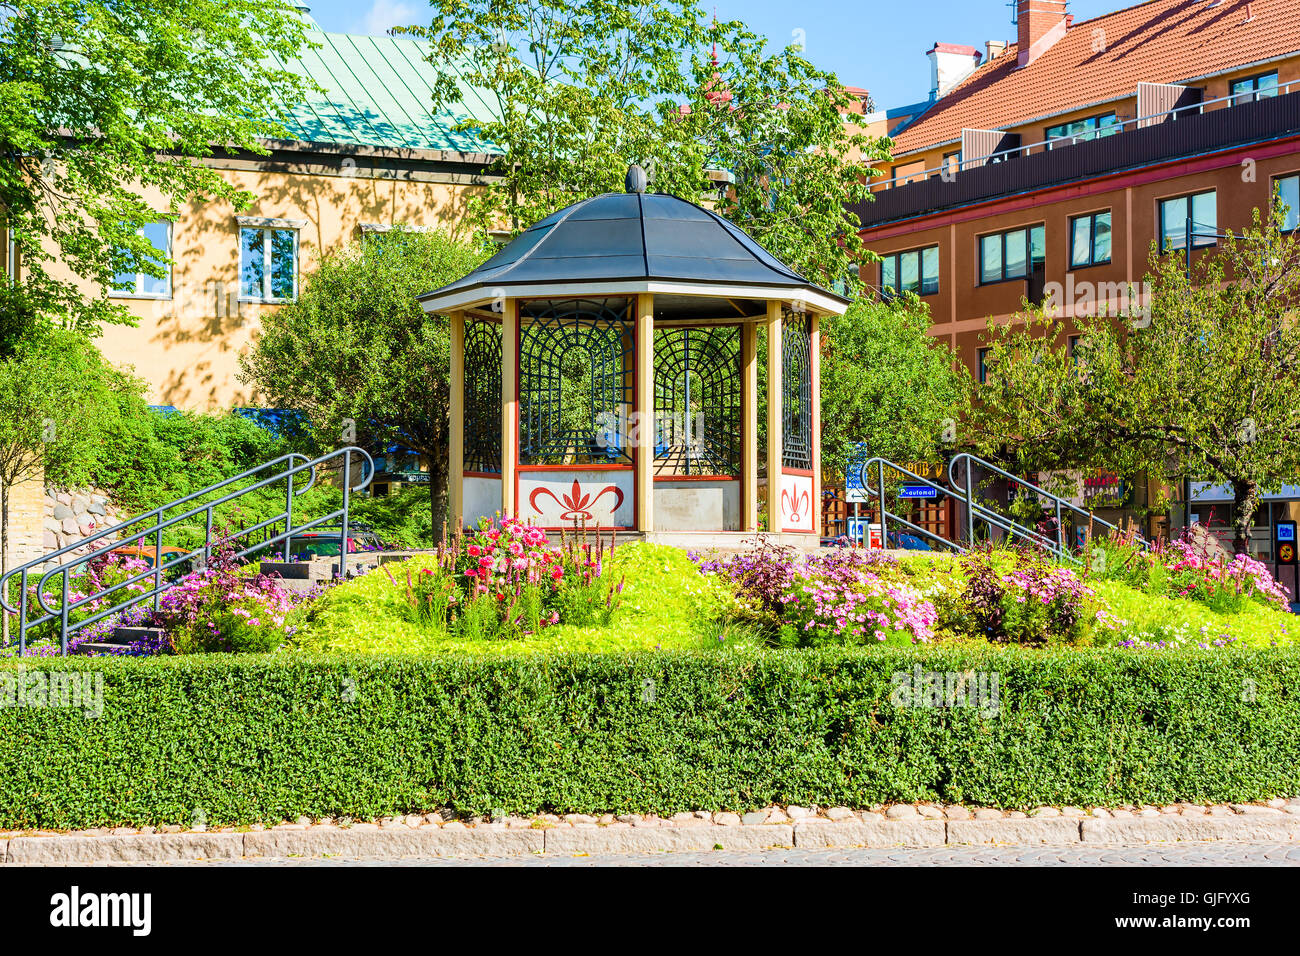 Kalmar, Sweden - August 10, 2016: Lovely octagonal gazebo on an elevated position and with two stairs leading up to it in a publ Stock Photo